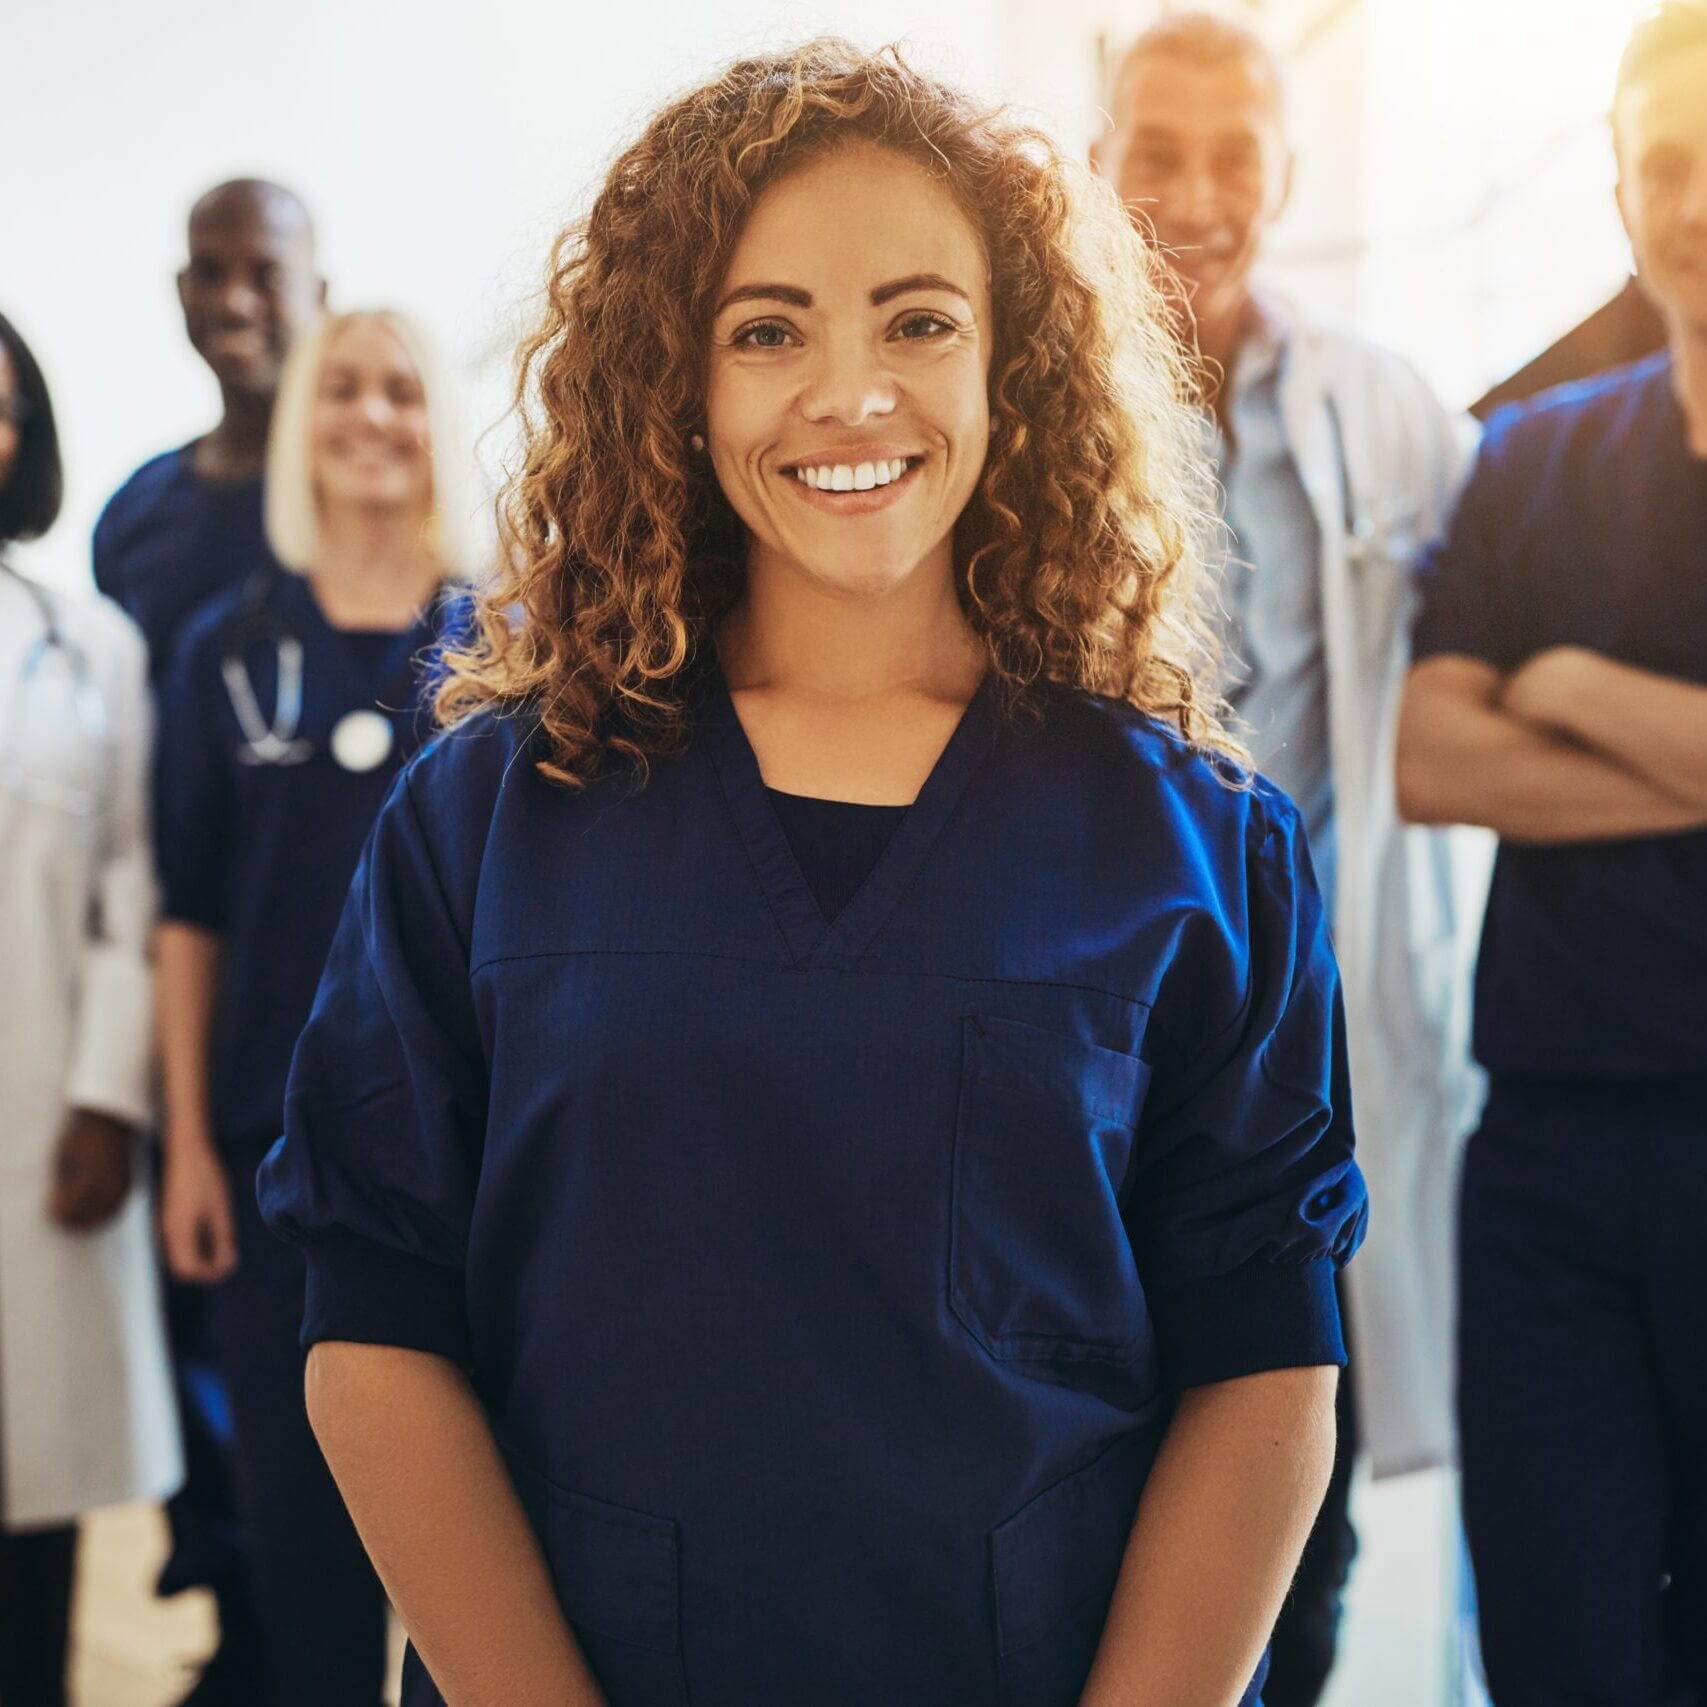 Smiling young female doctor standing in a hospital corridor with a diverse group of medical staff standing behind her